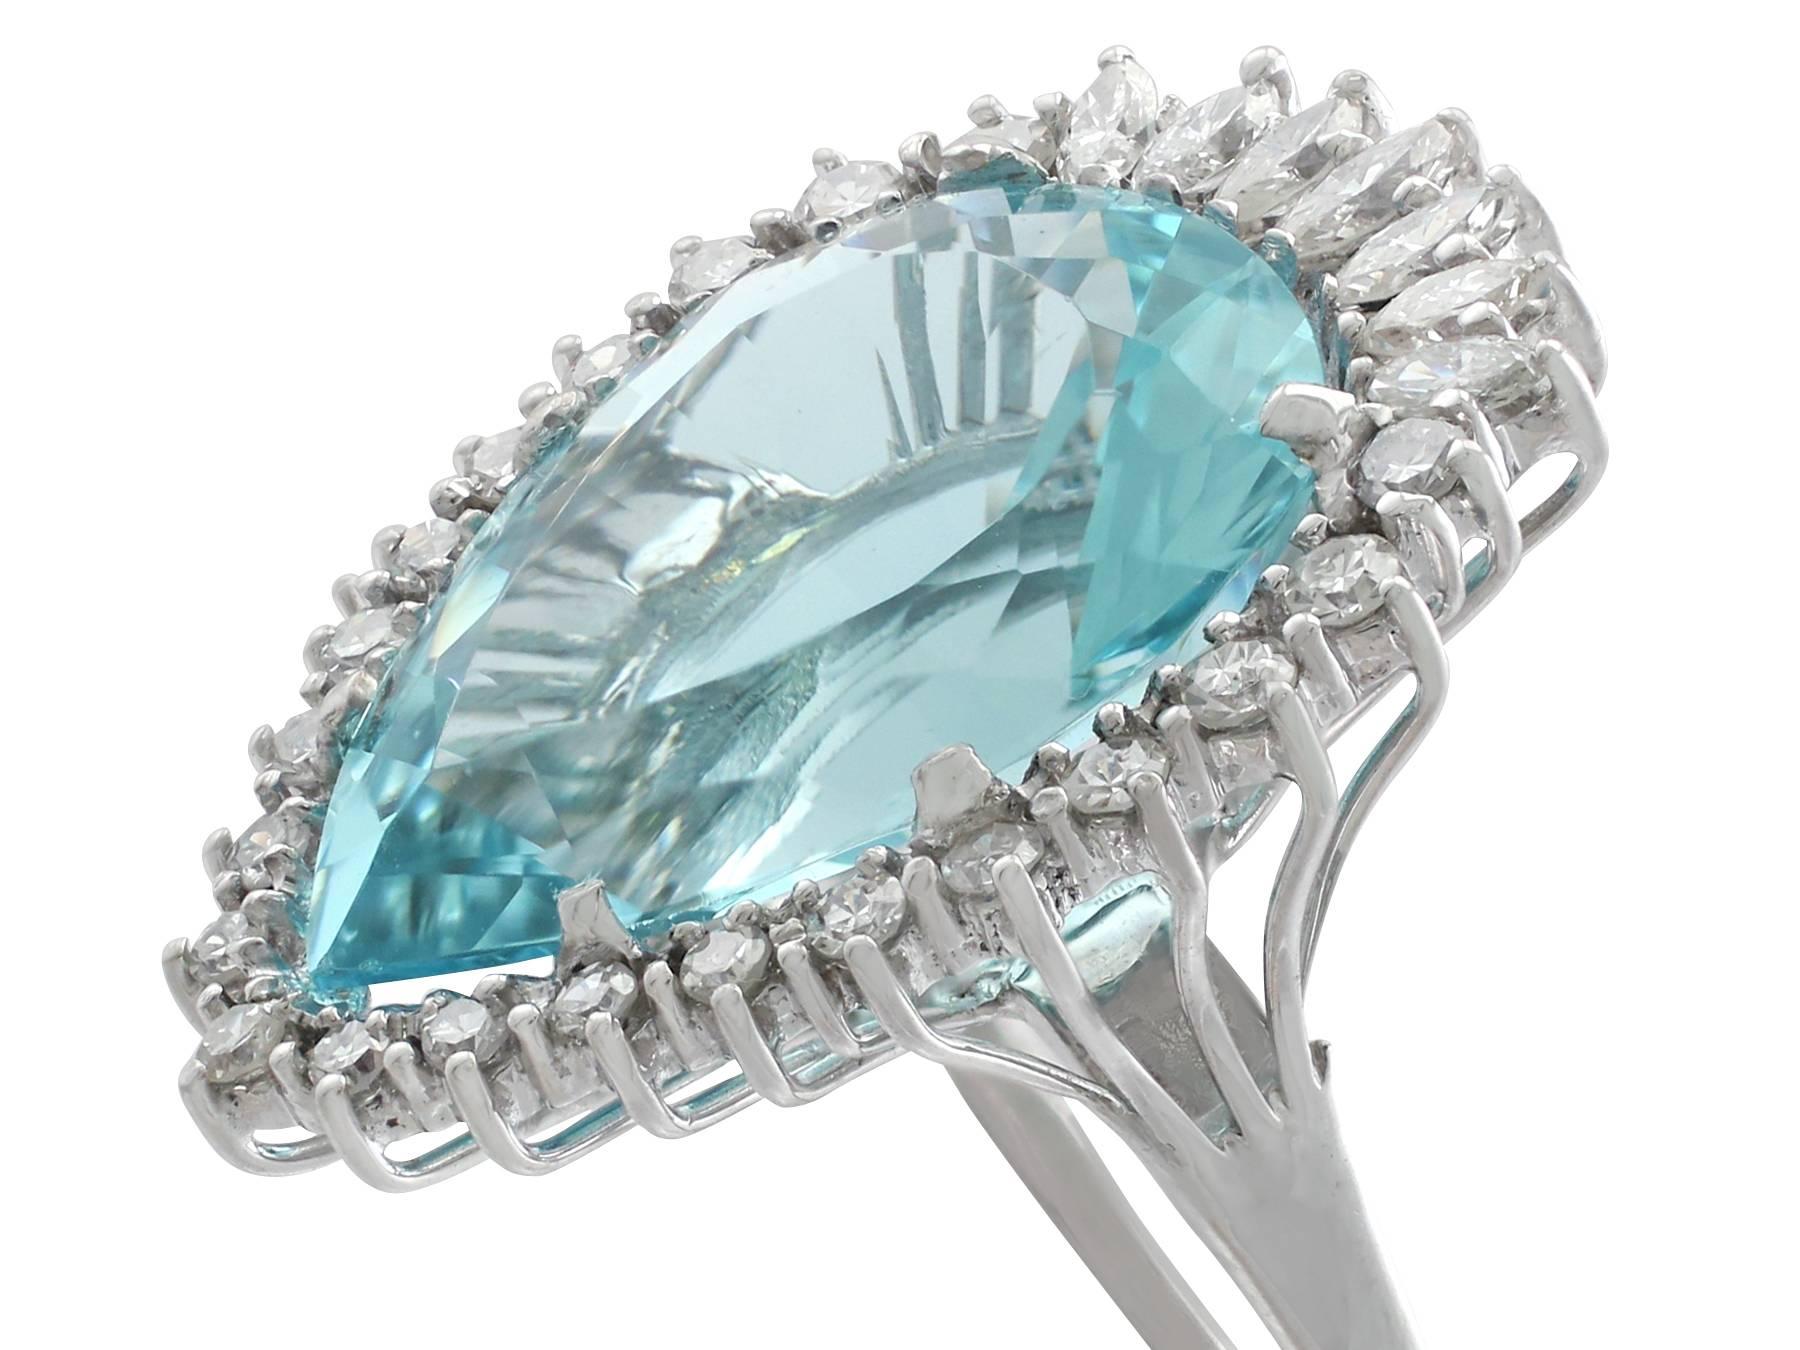 A stunning vintage 15.64 carat aquamarine and 1.96 carat diamond, 18 karat white gold cocktail ring; part of our diverse vintage jewelry collections

This stunning, fine and impressive pear cut aquamarine ring has been crafted in 18k white